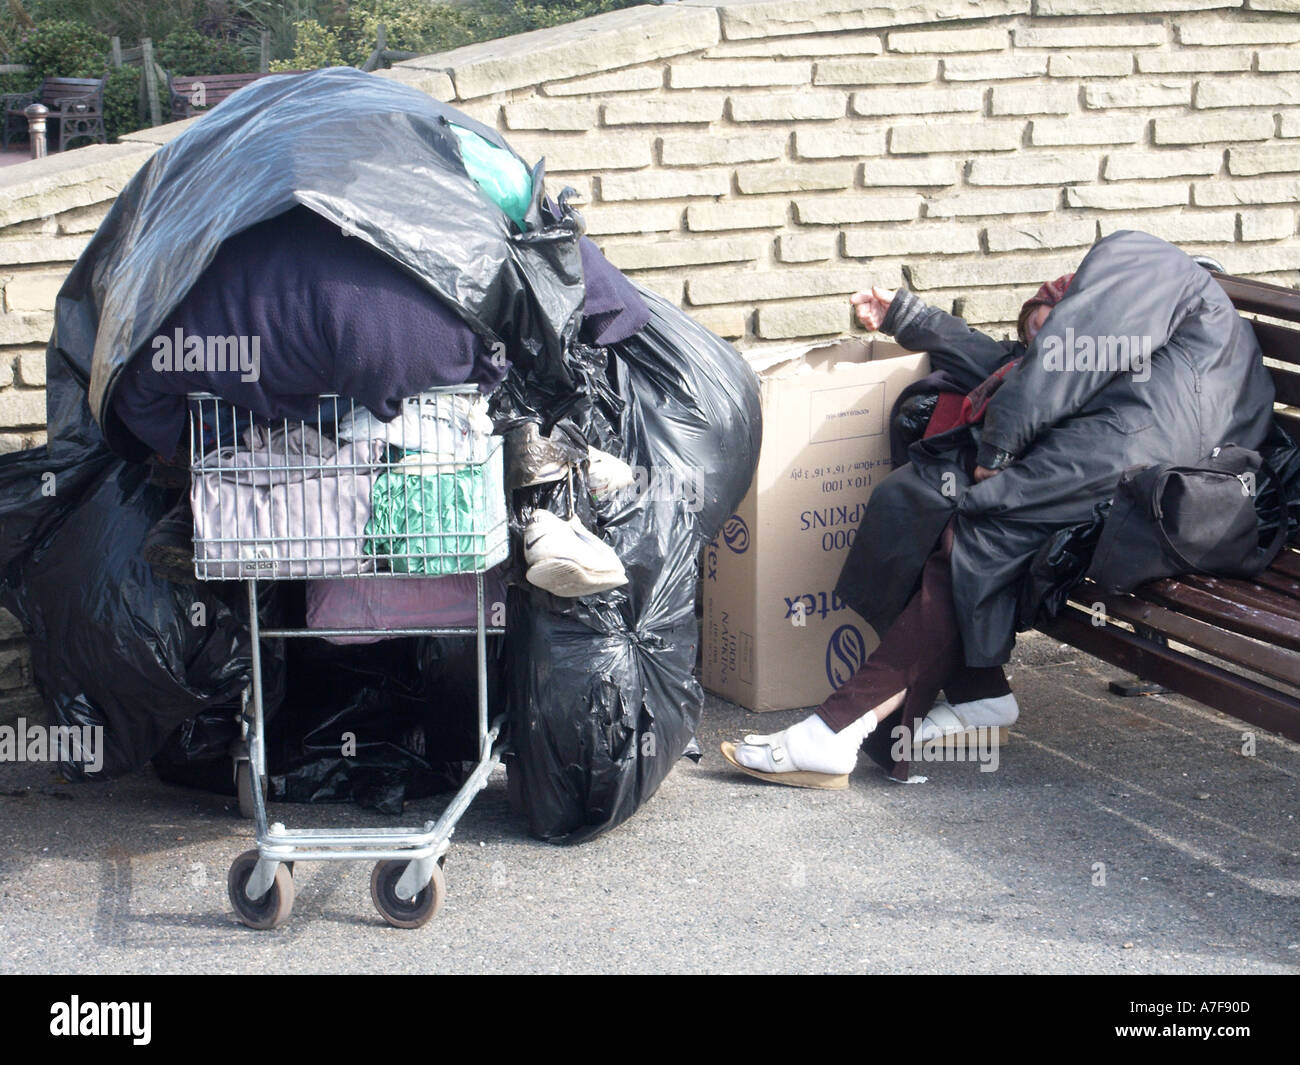 A person sleeping rough on seafront promenade belongings in a supermarket trolley Worthing West Sussex England UK Stock Photo